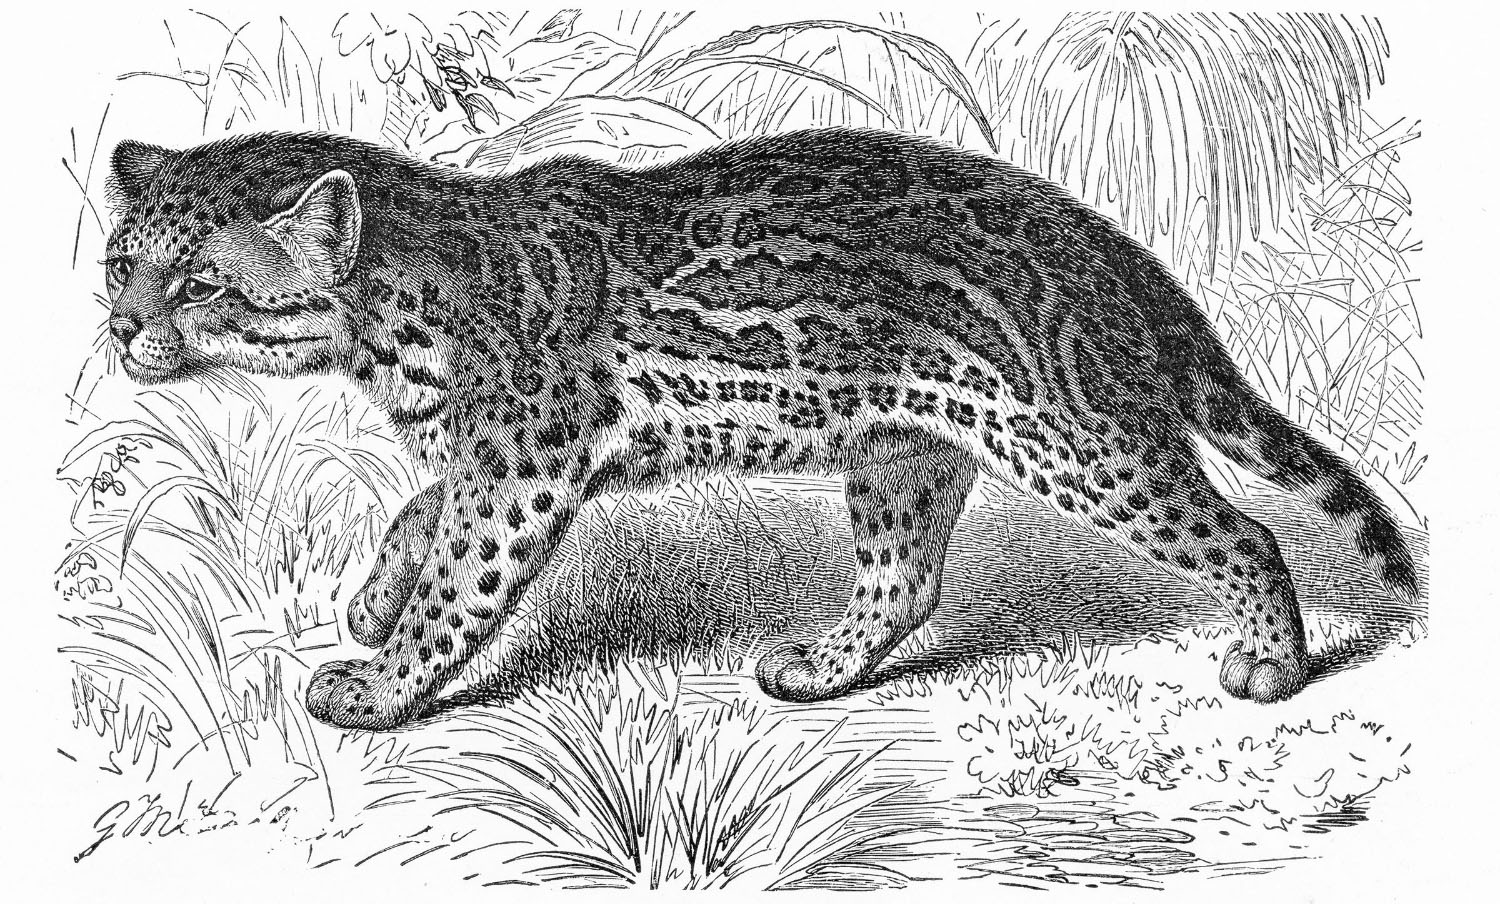 An illustration of a spotted ocelot